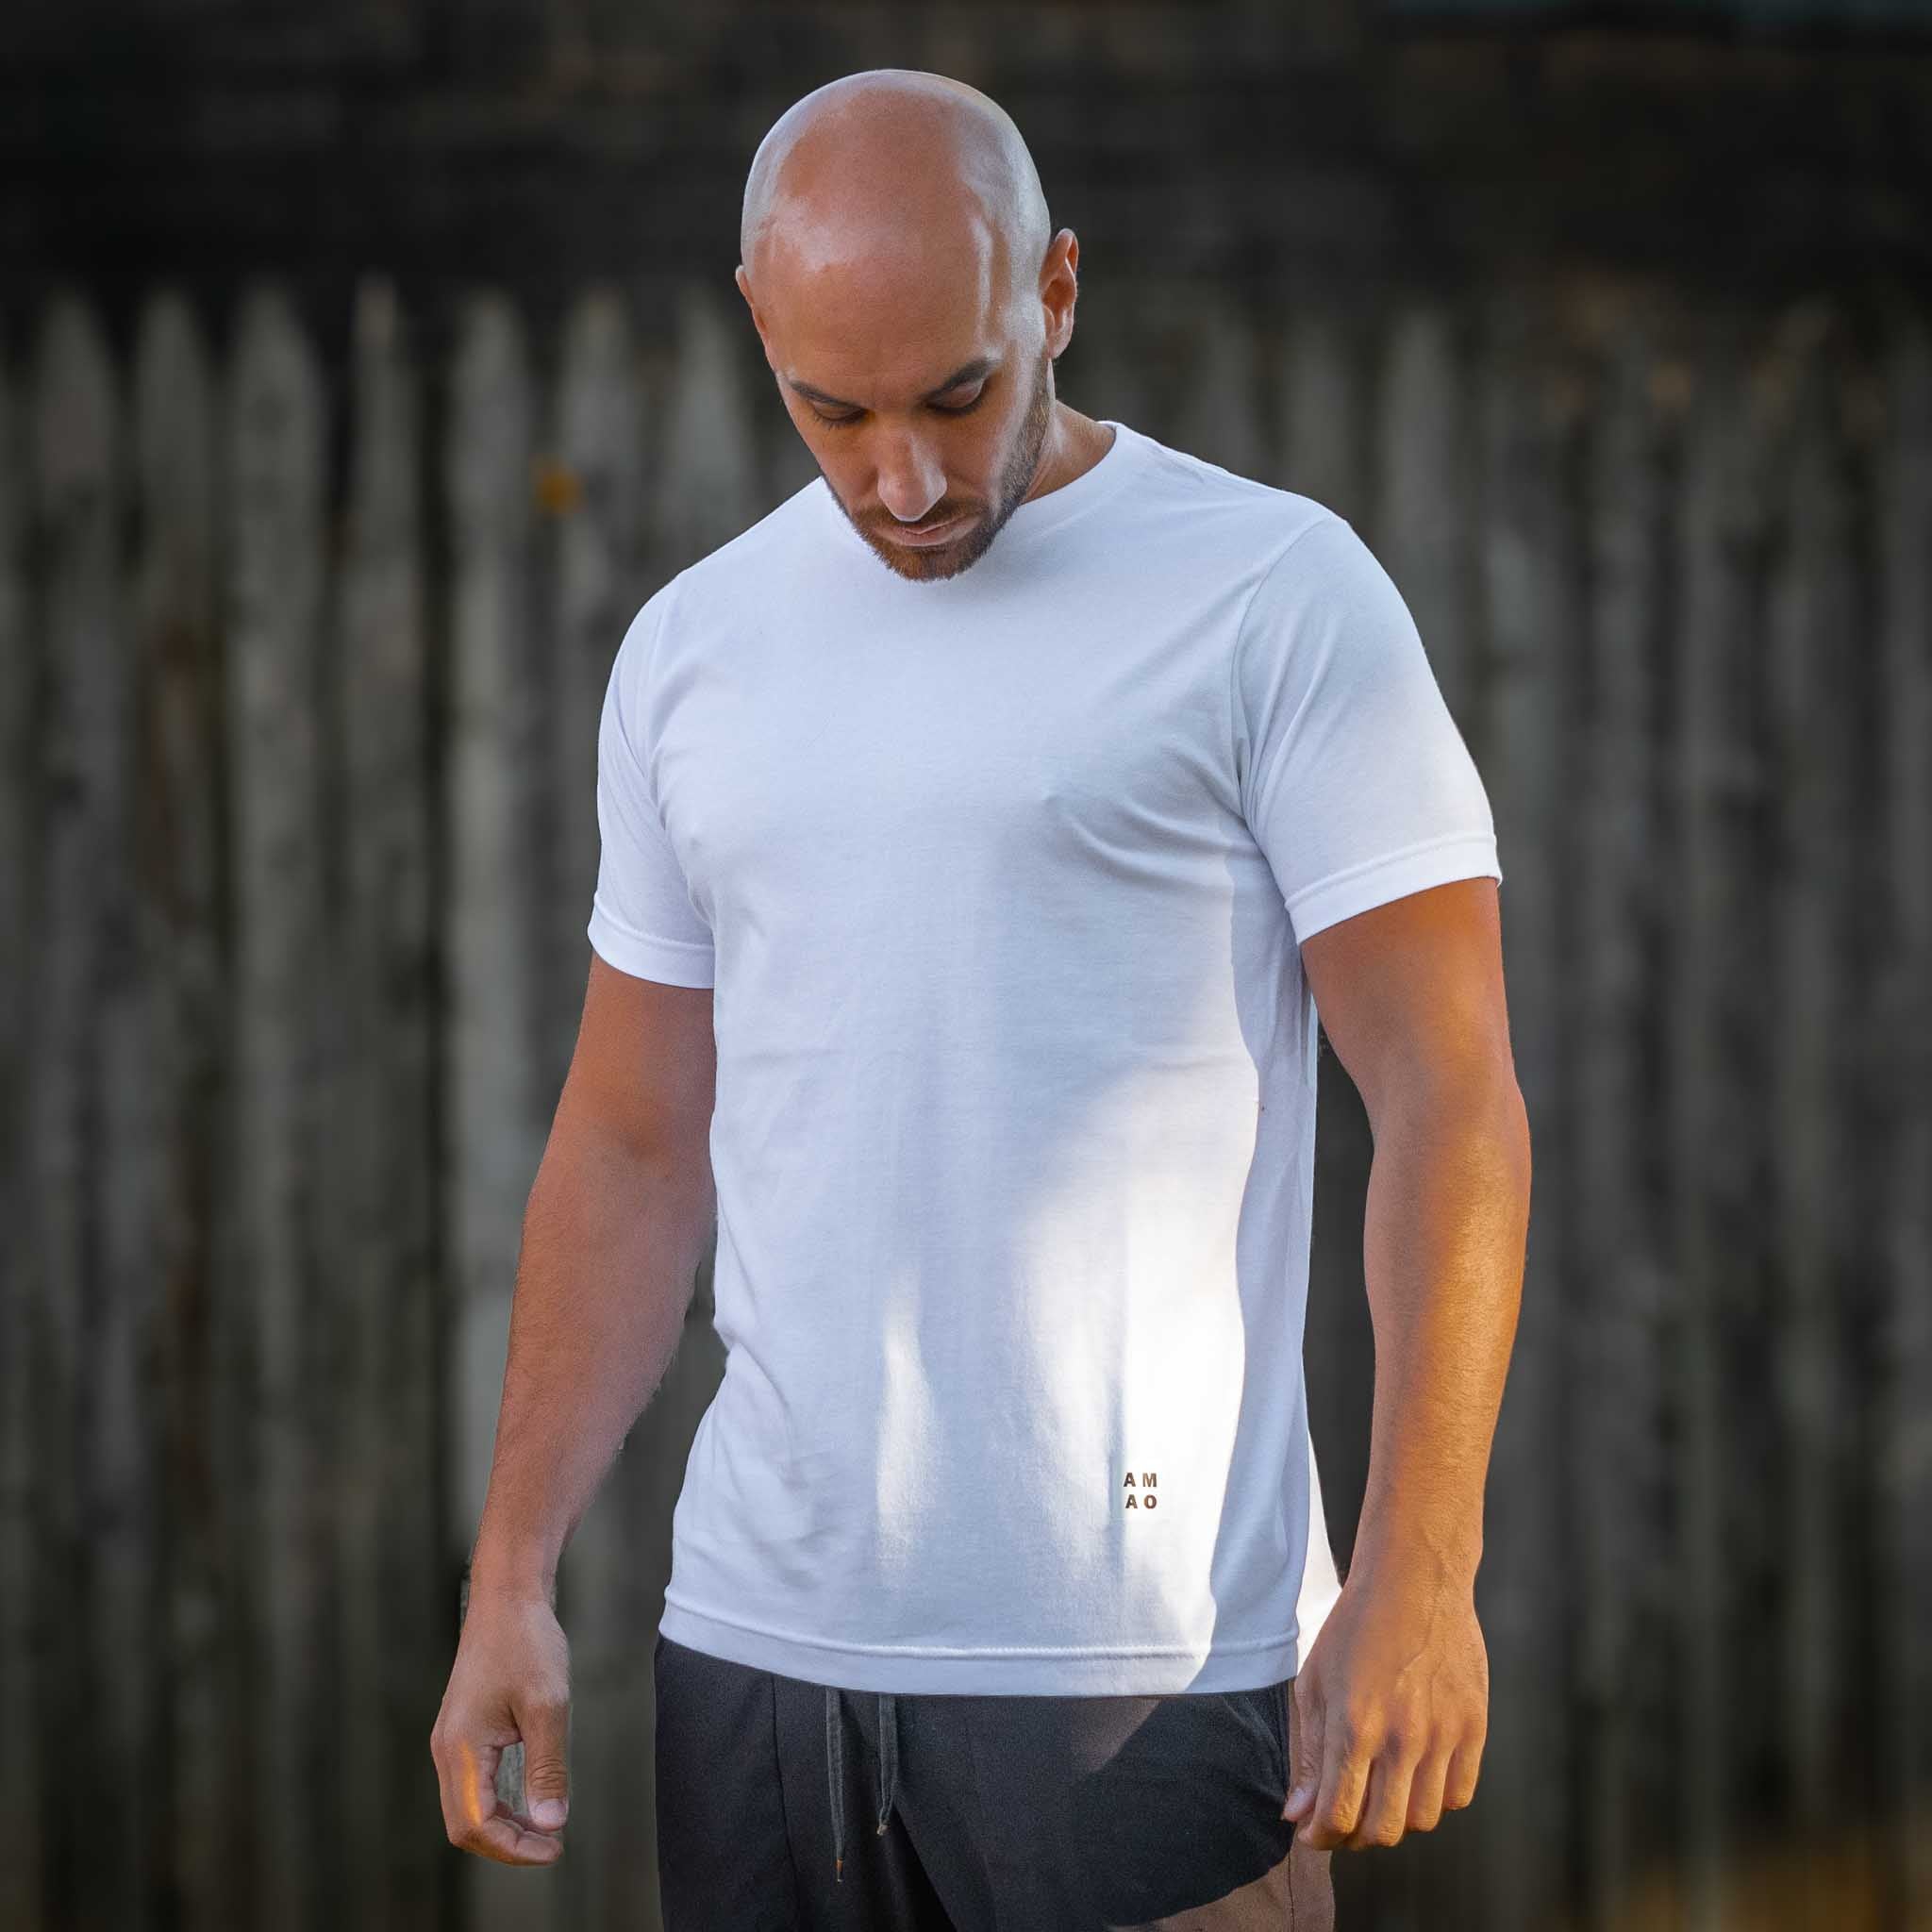 AMAO Classic SuperSoft 100% Cotton SS Crew Tee - Compare at $64.99 (Made to Order - Allow 2-3 weeks for delivery)